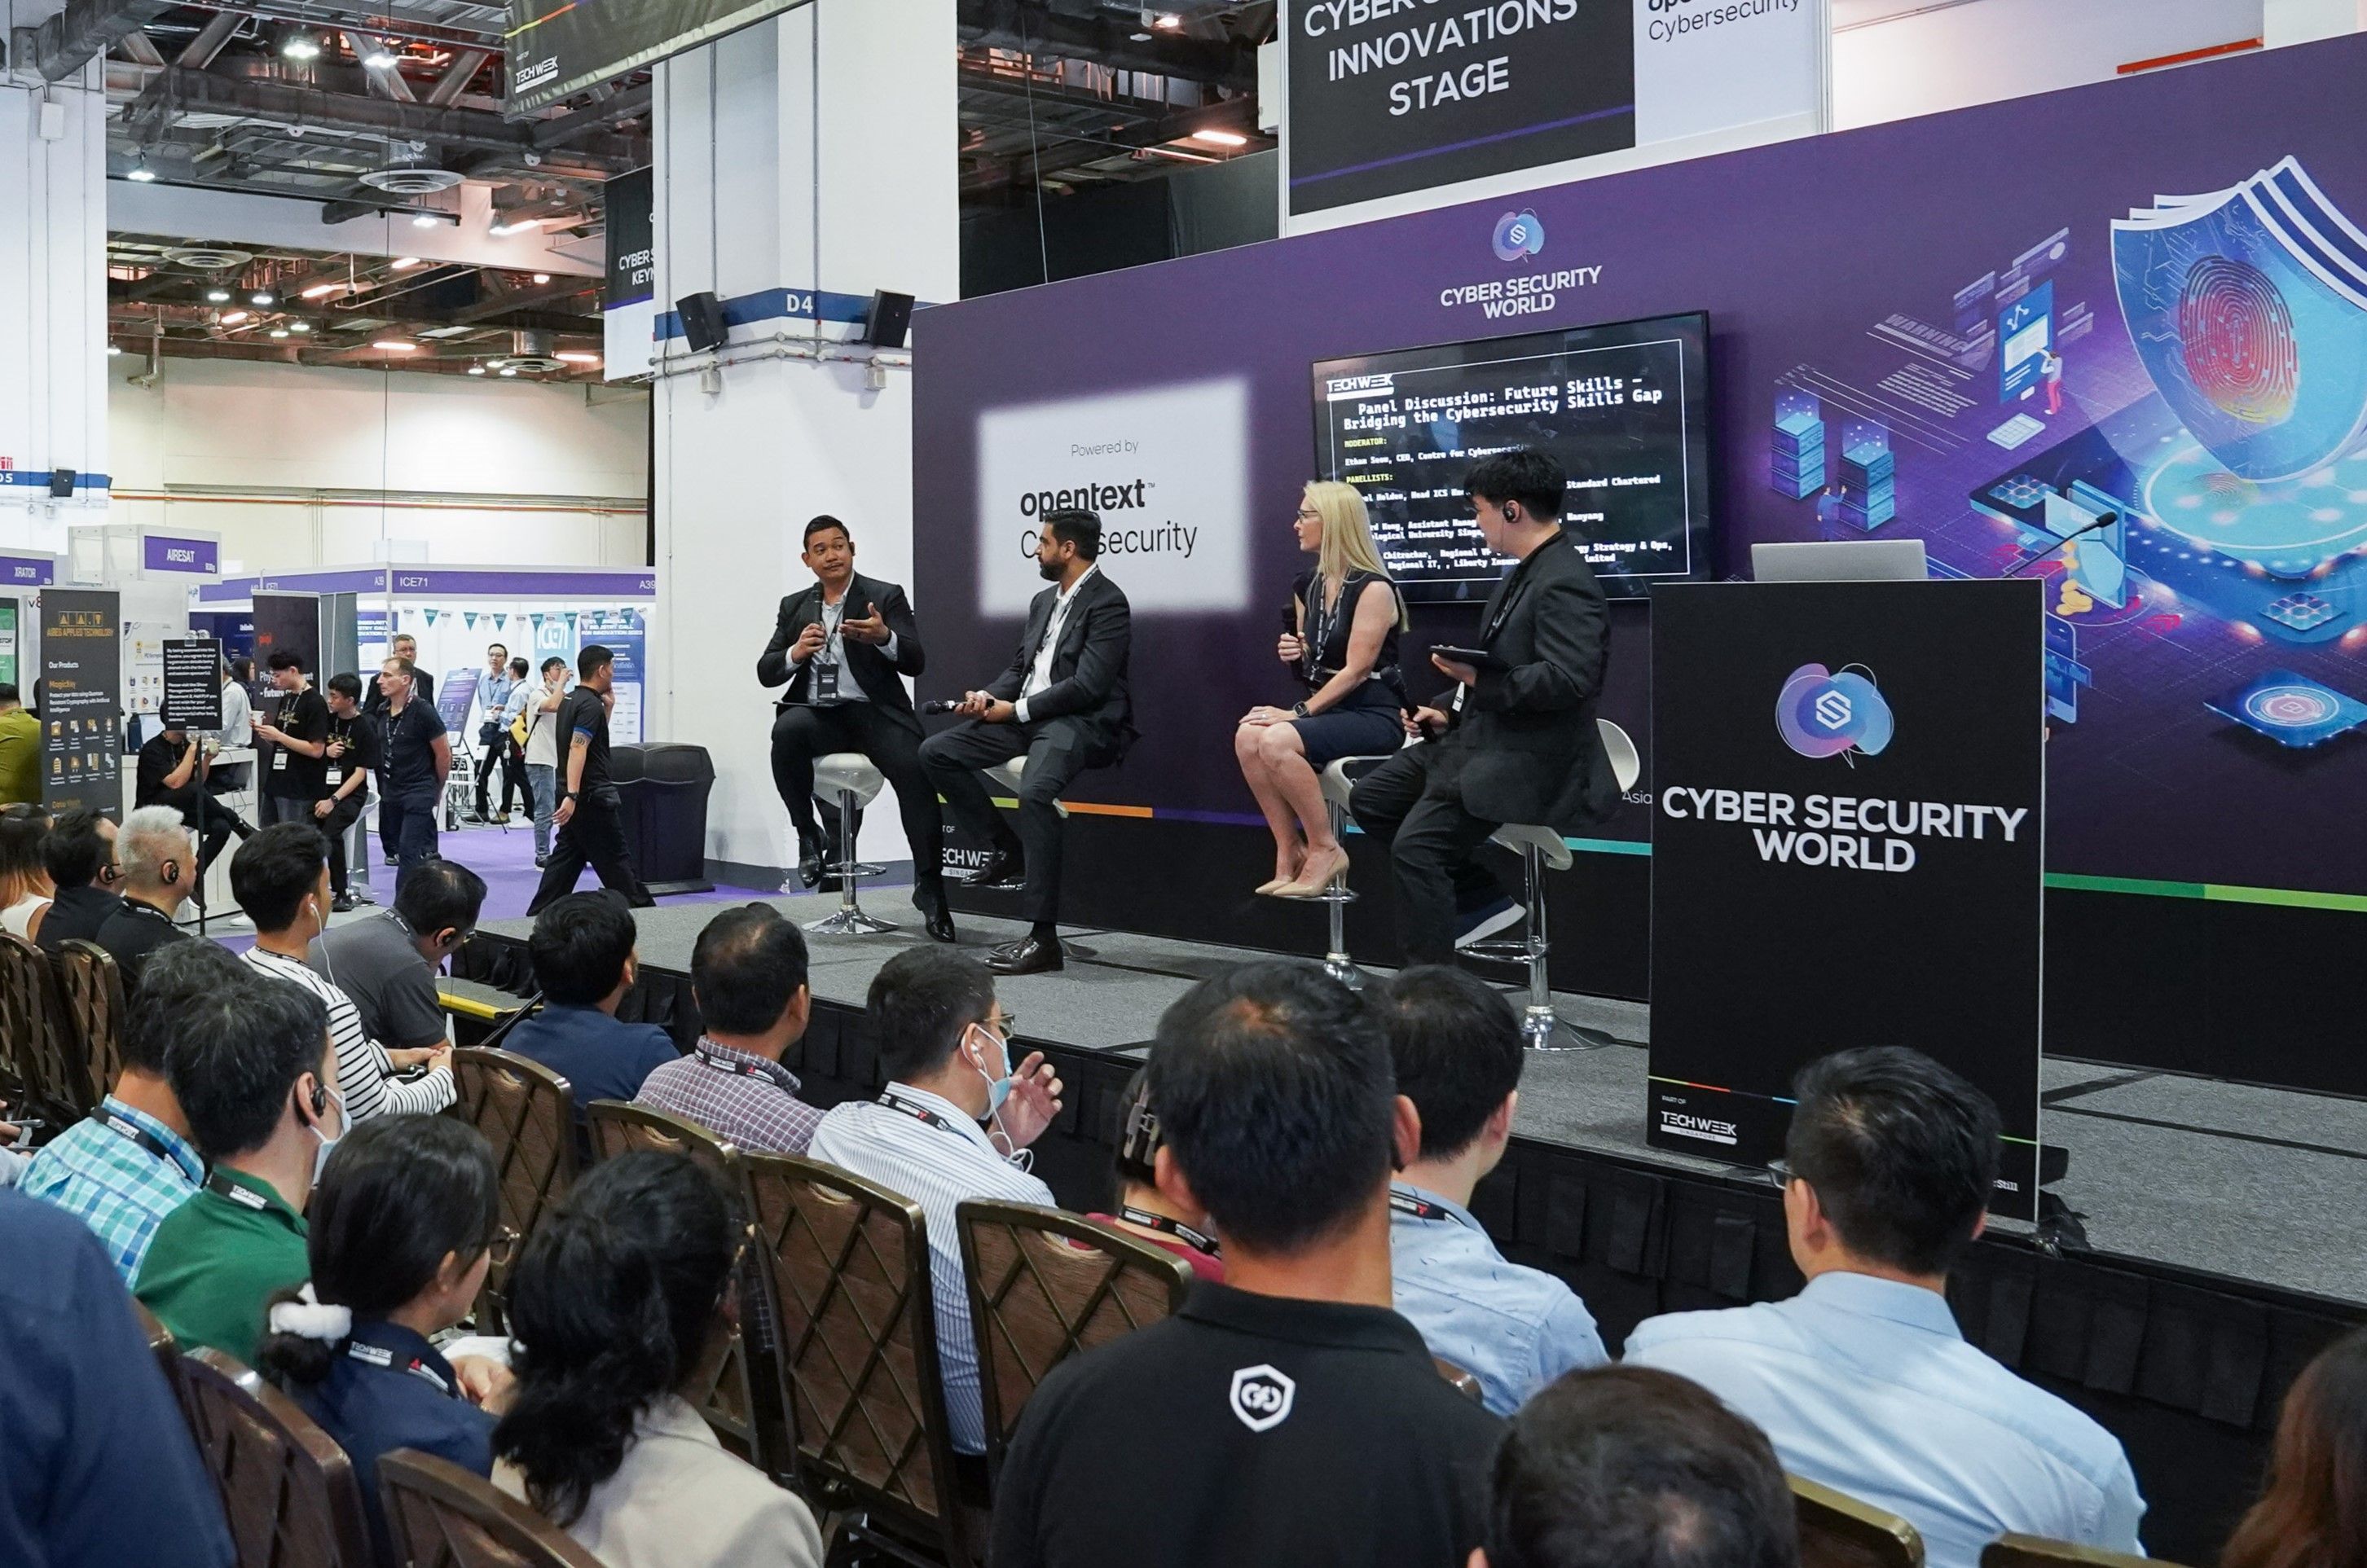 Cybersecurity Innovations Theatre